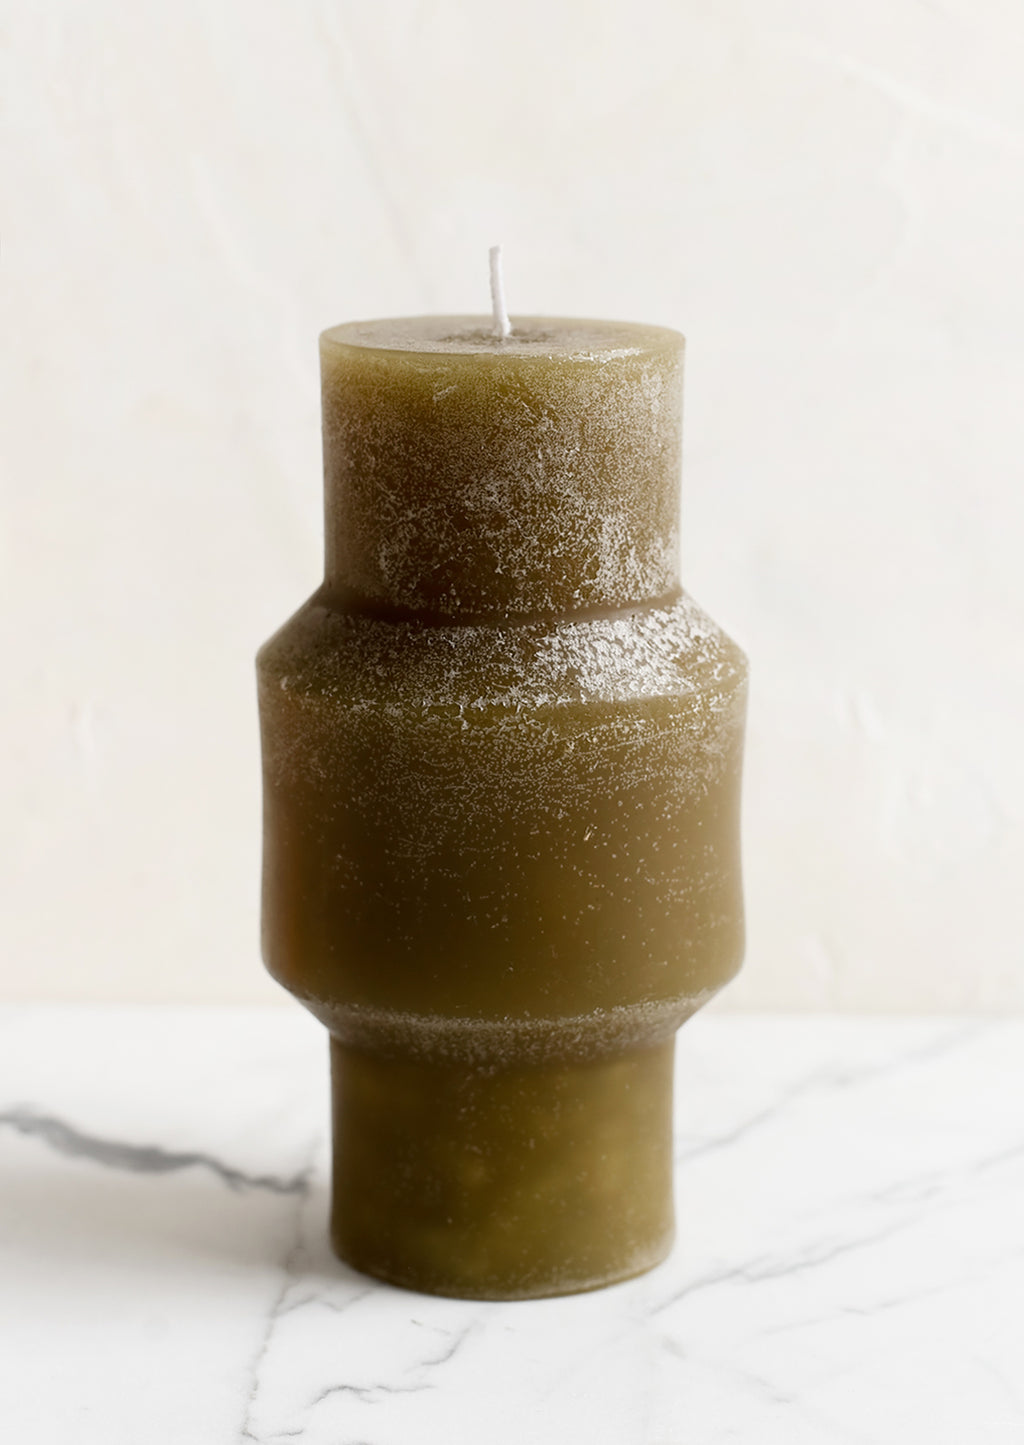 Medium (Plateau) / Olive: A medium carved pillar candle with waxy finish in olive.